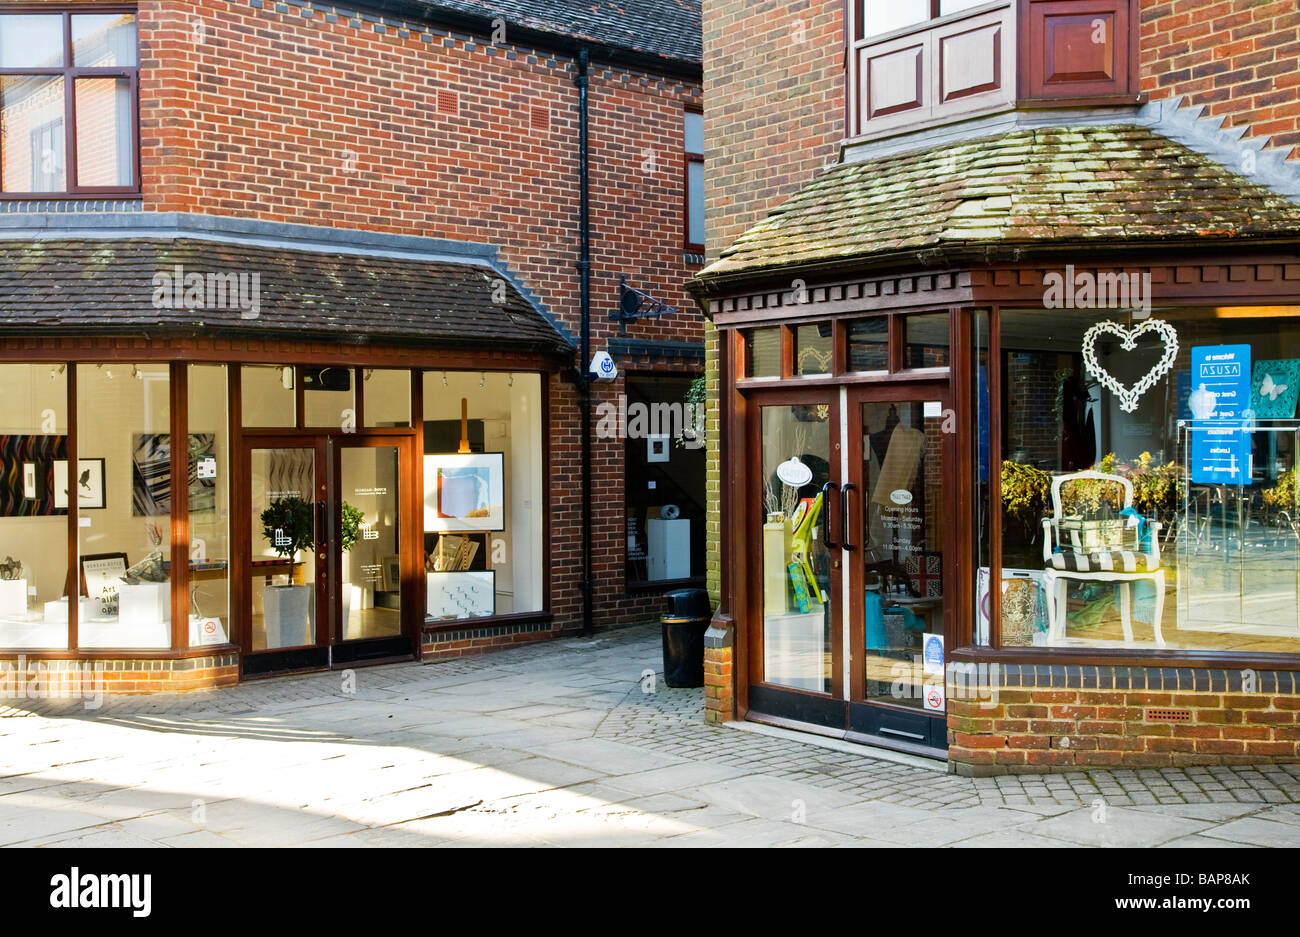 Art gallery and gift shop in Hughenden Yard a pedestrianised area of upmarket shops and cafes Marlborough Wiltshire England UK Stock Photo